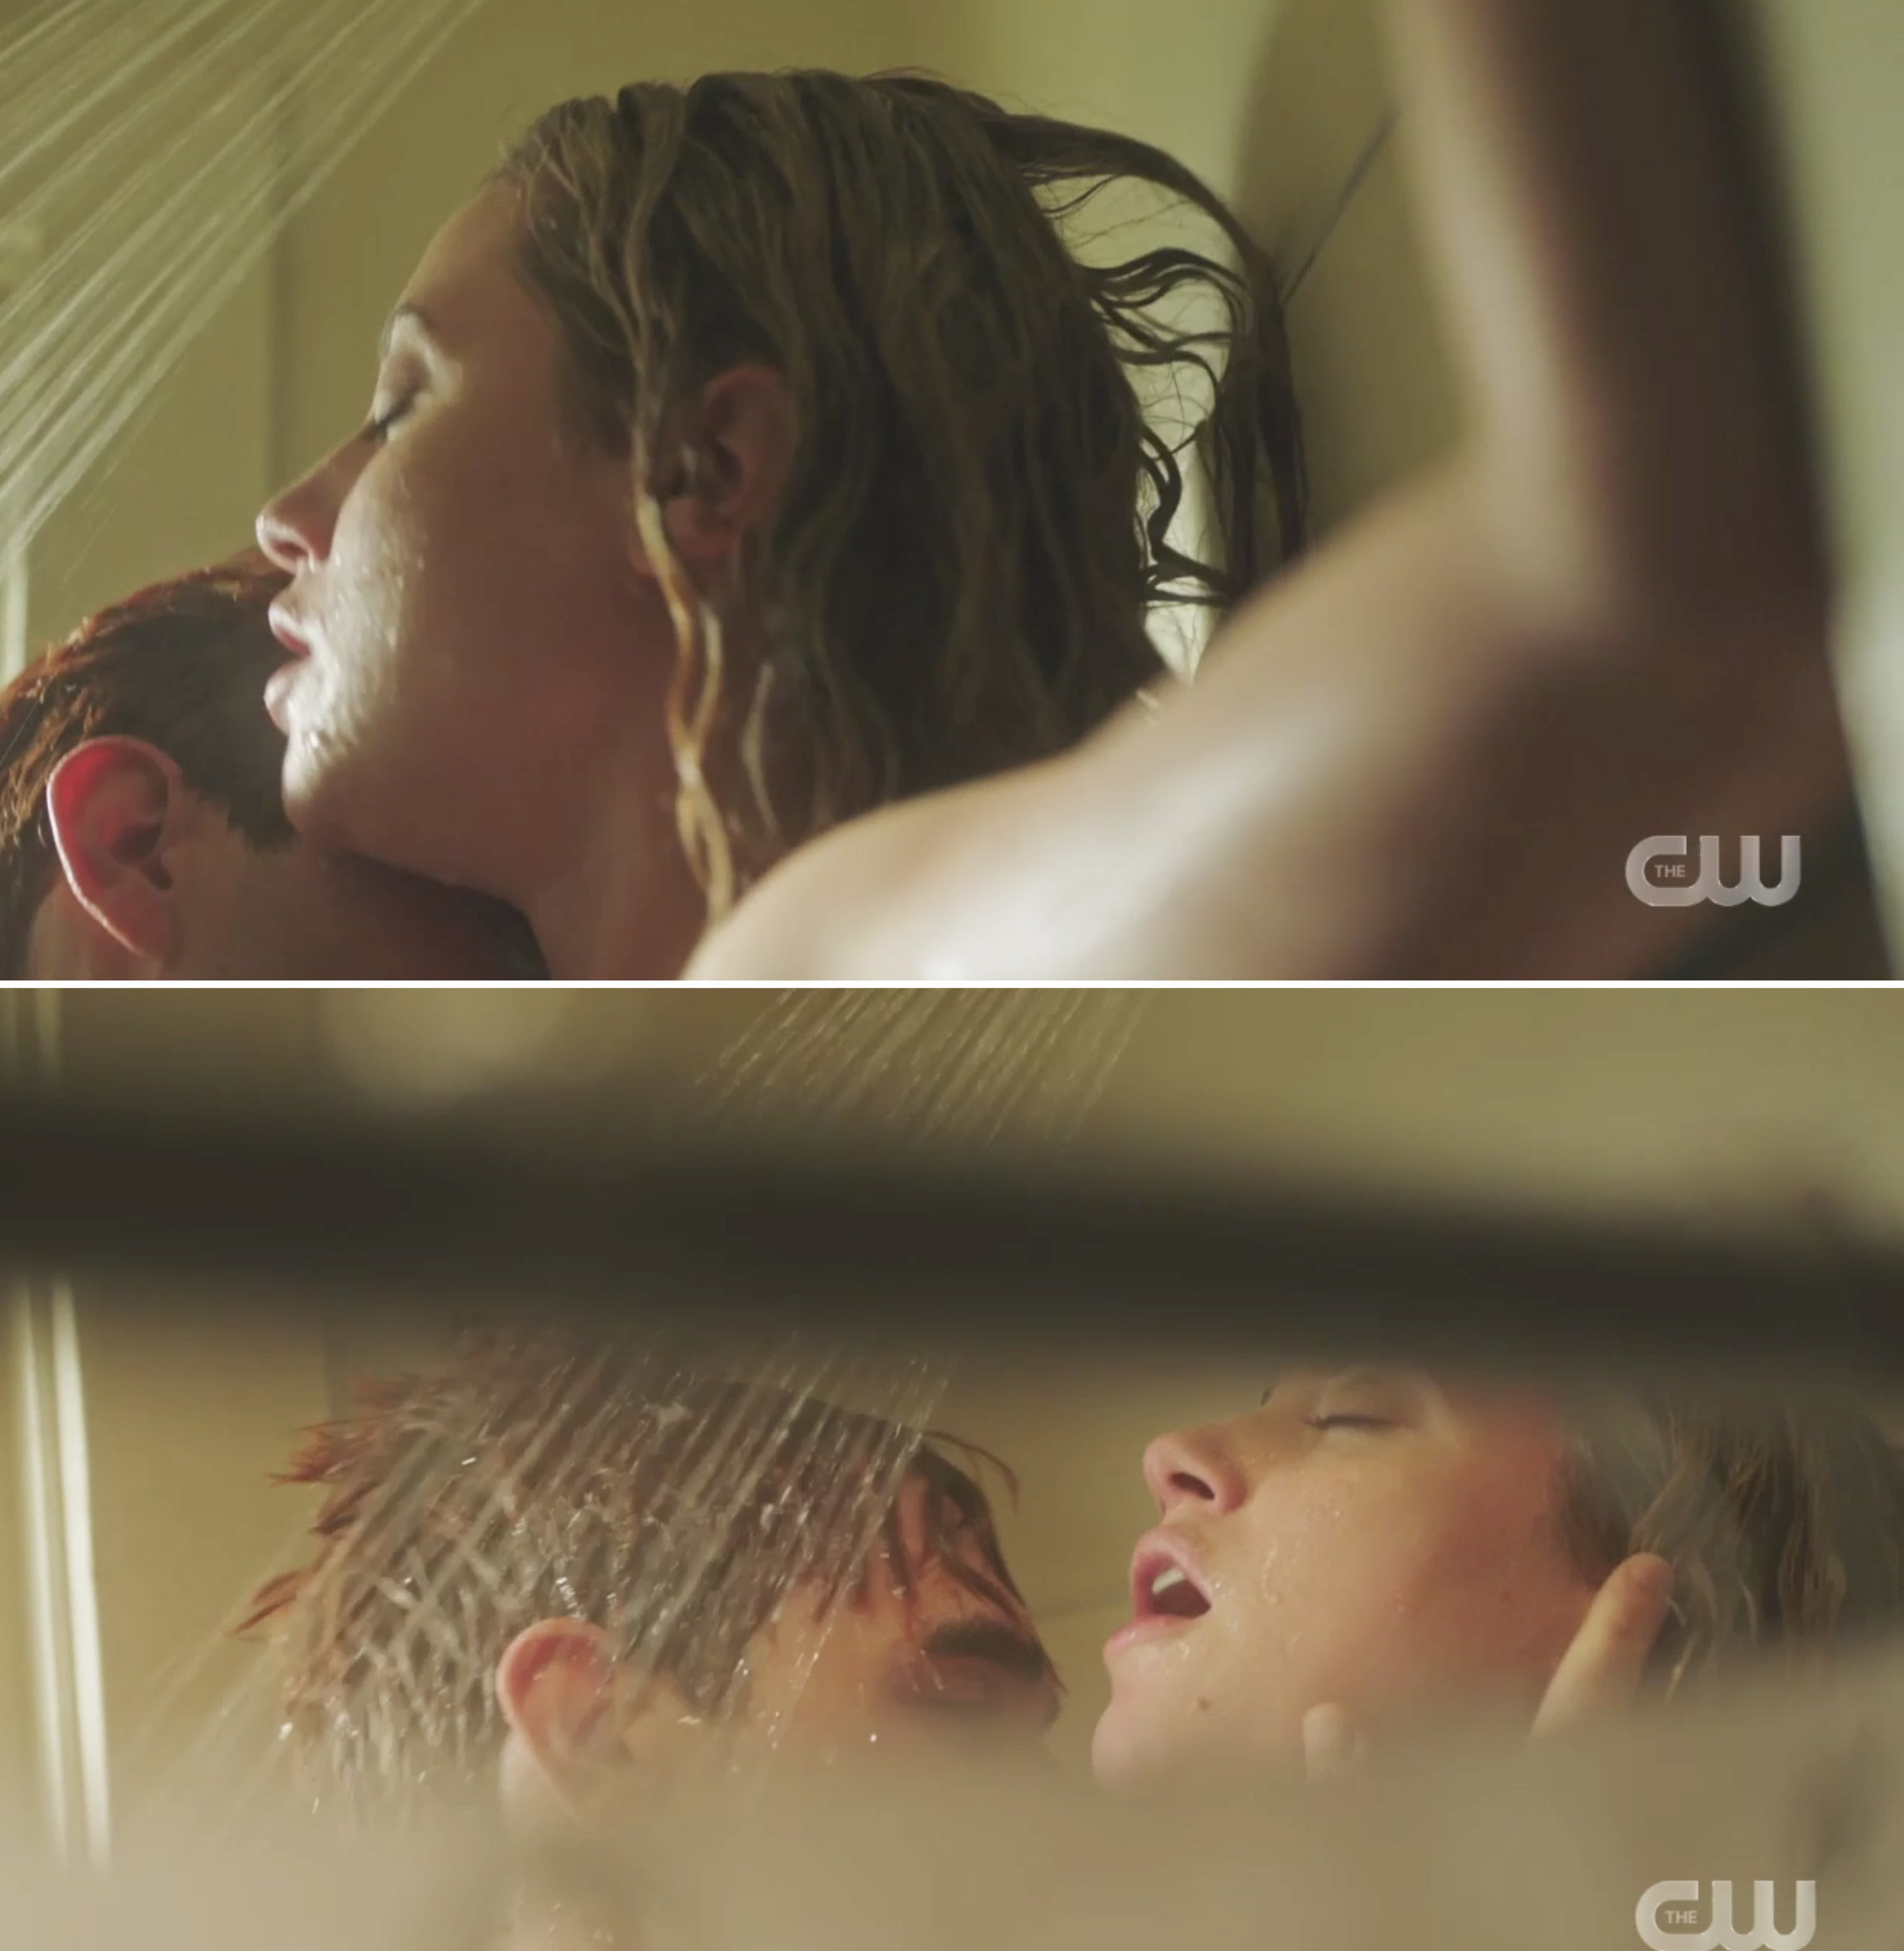 Betty and Archie having sex and kissing in the shower